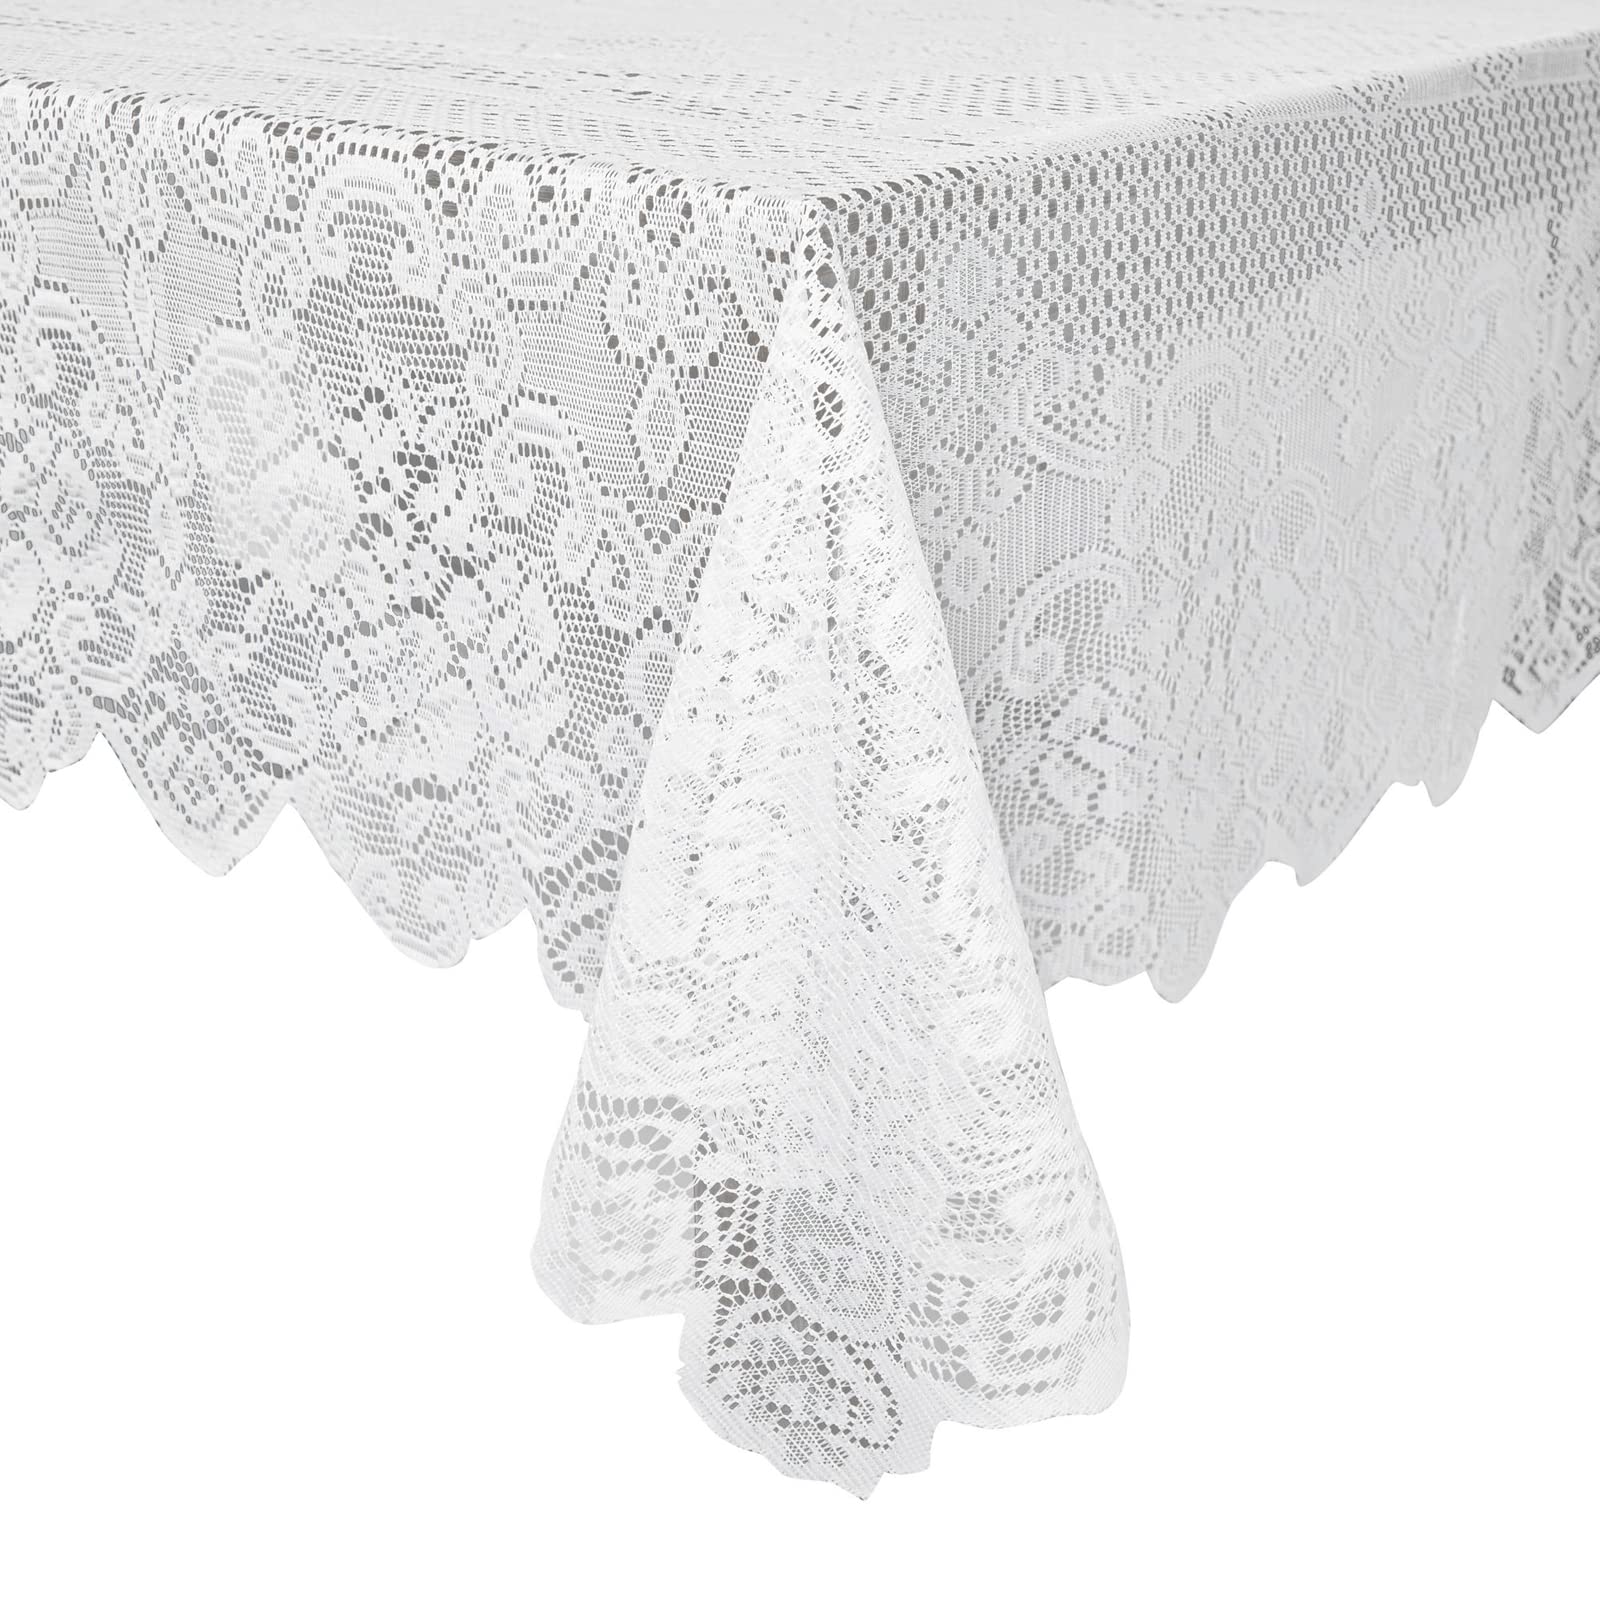 Rectangular Lace Tablecloth with Elegant Floral Patterns, White, 242 x 146 cm